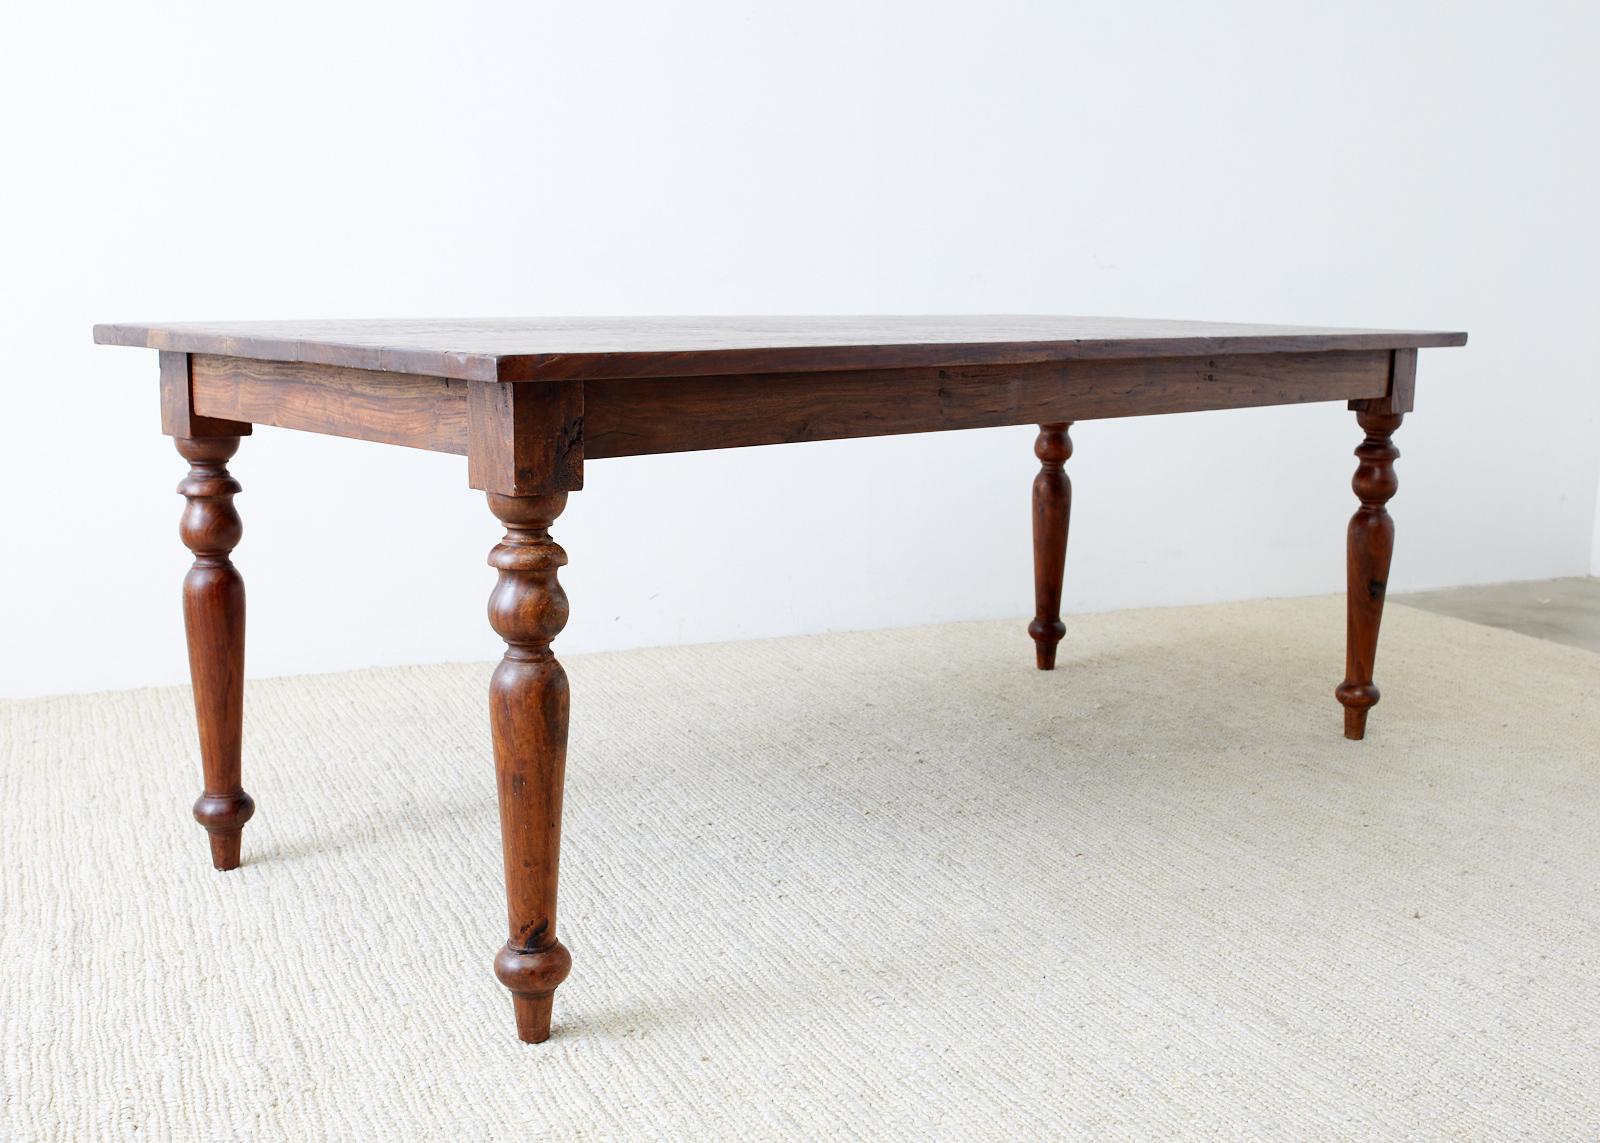 Gorgeous hardwood dining table constructed from teak or rosewood. Made in a rustic farmhouse style from hand-hewn planks 1 inch thick with a beautiful soft chink groove finish on the top. Very heavy and solid supported by elegant turned legs. The